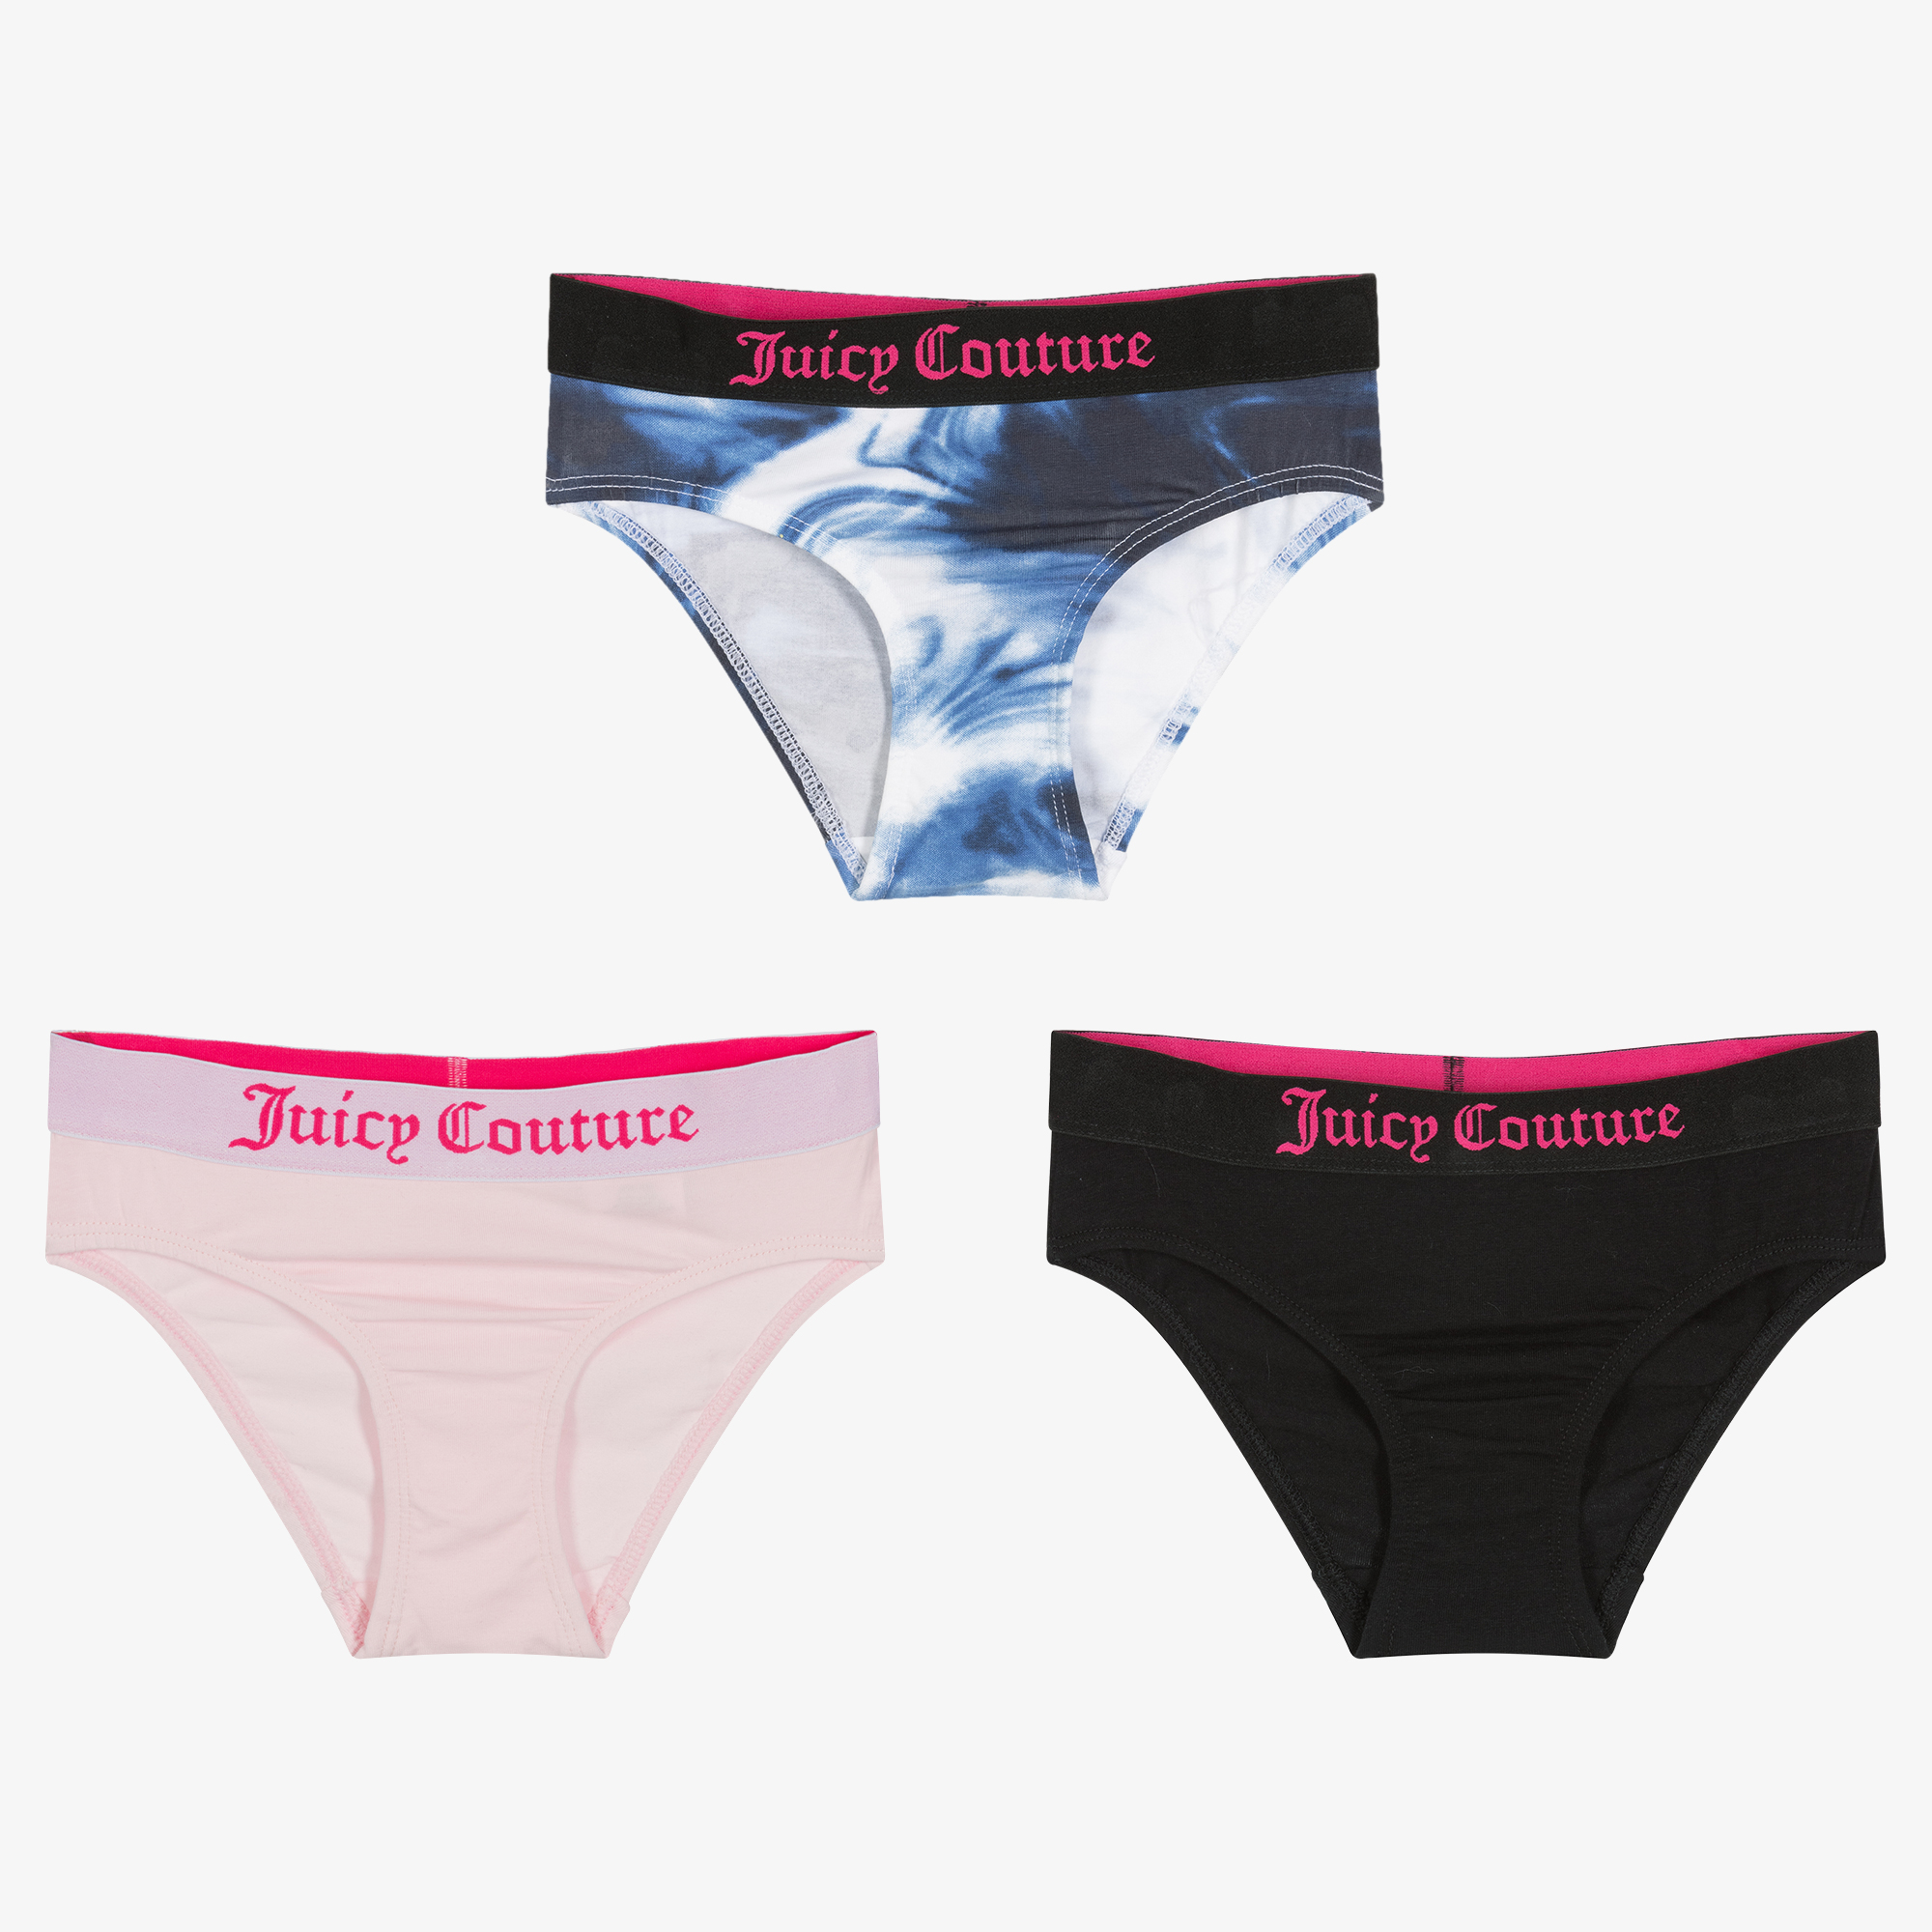 Juicy Couture, Intimates & Sleepwear, Juicy Couture Cotton Spandex  Panties Underwear Small Lot Of 5 Pack Set Pair Nwt